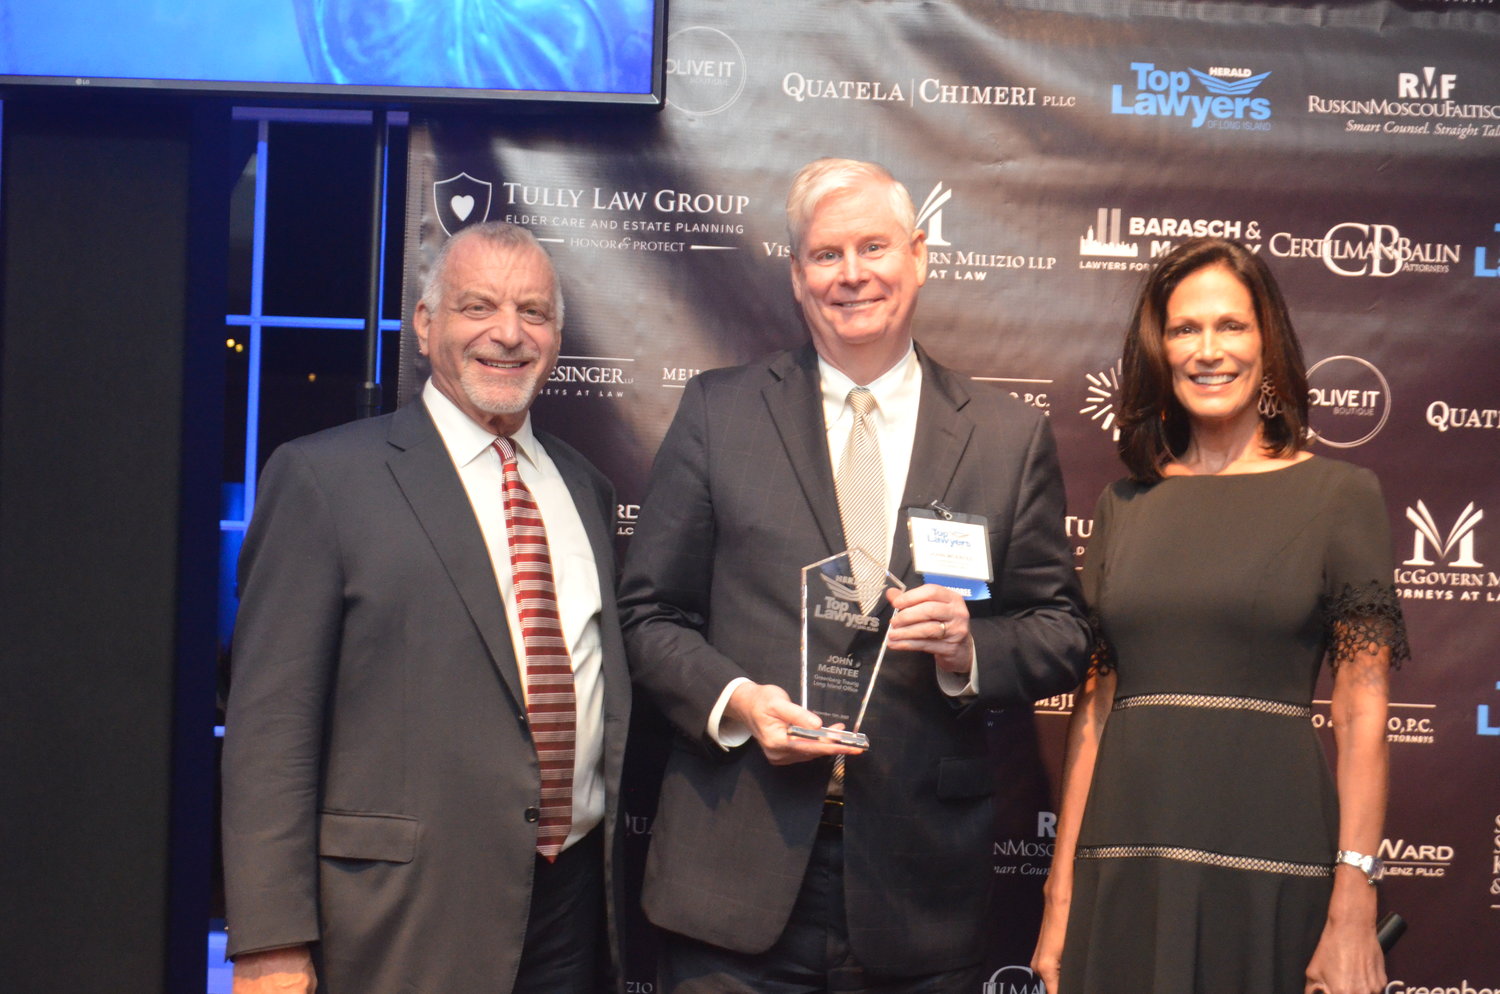 John McEntee from Greenberg and Traurig LLP poses with his crystal award in between Cliff Richner and host Judy Goss. McEntee has been selected to head up the Greenberg and Traurig LLP Long Island office.